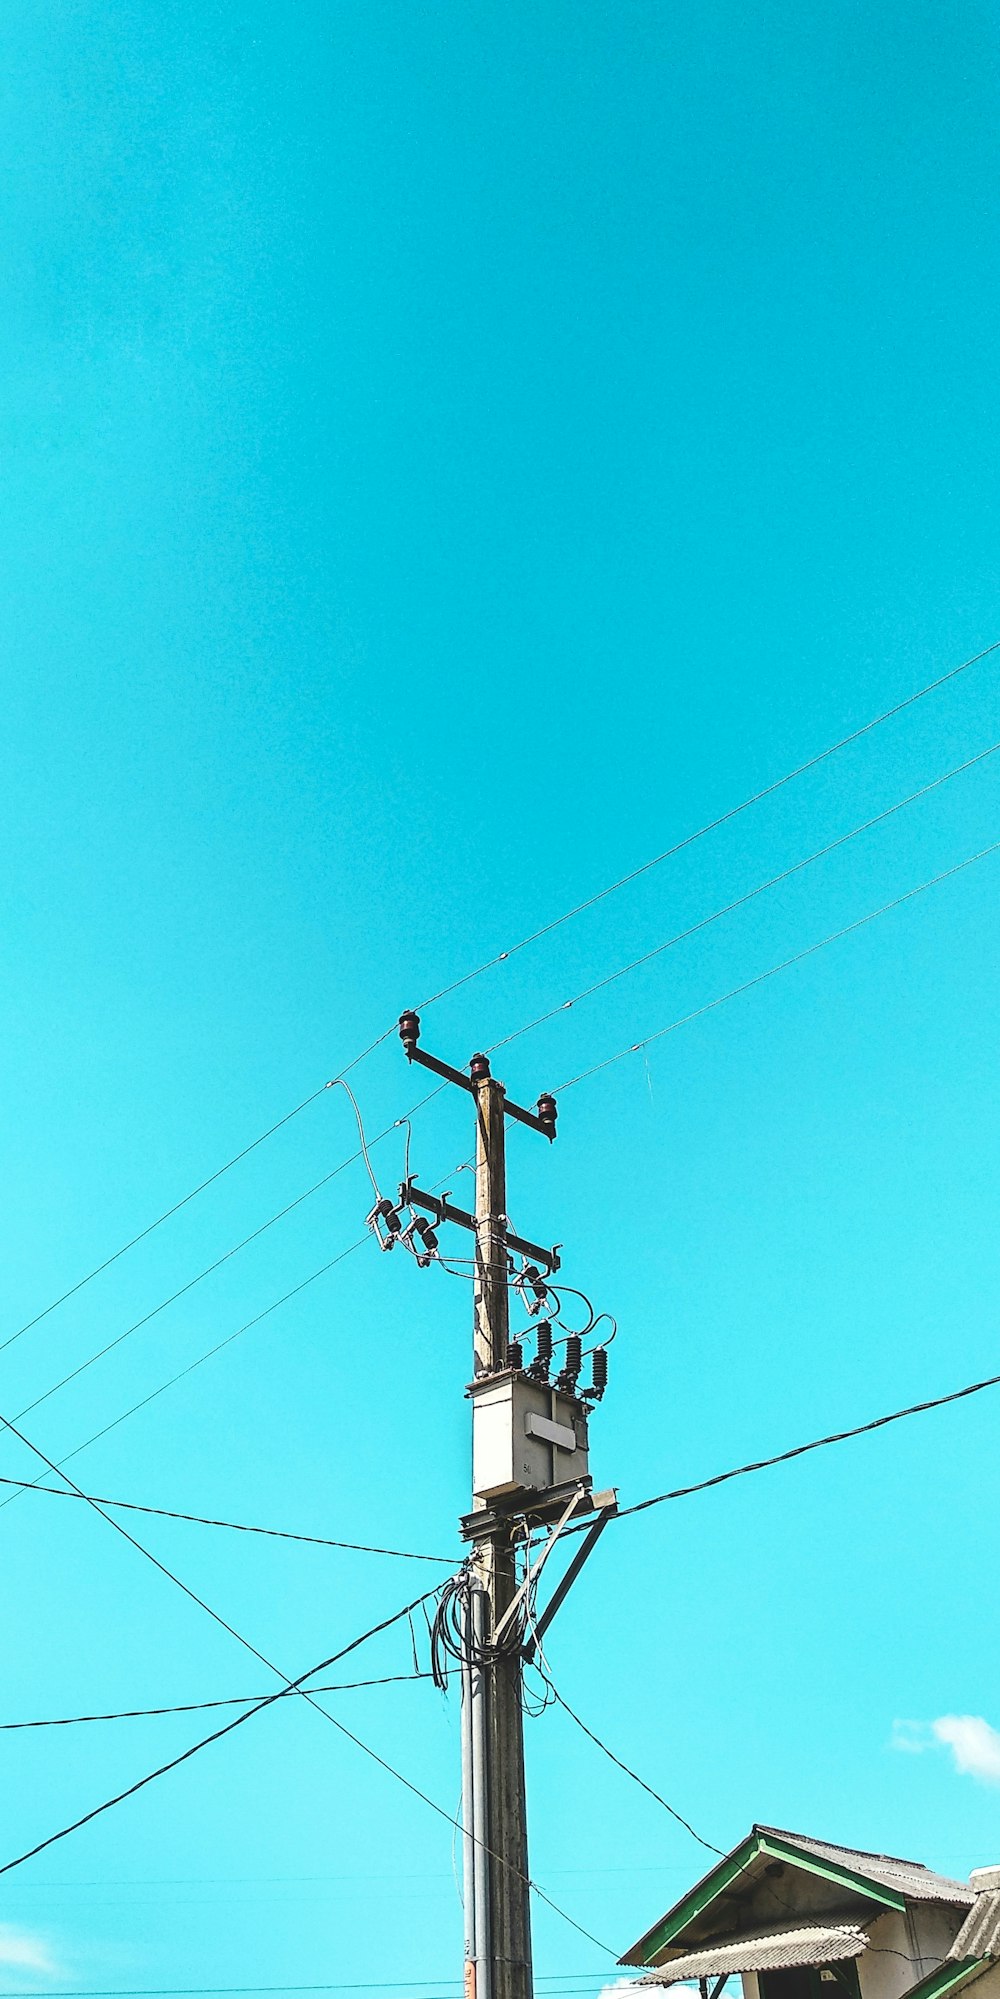 white and gray electric post under blue skies